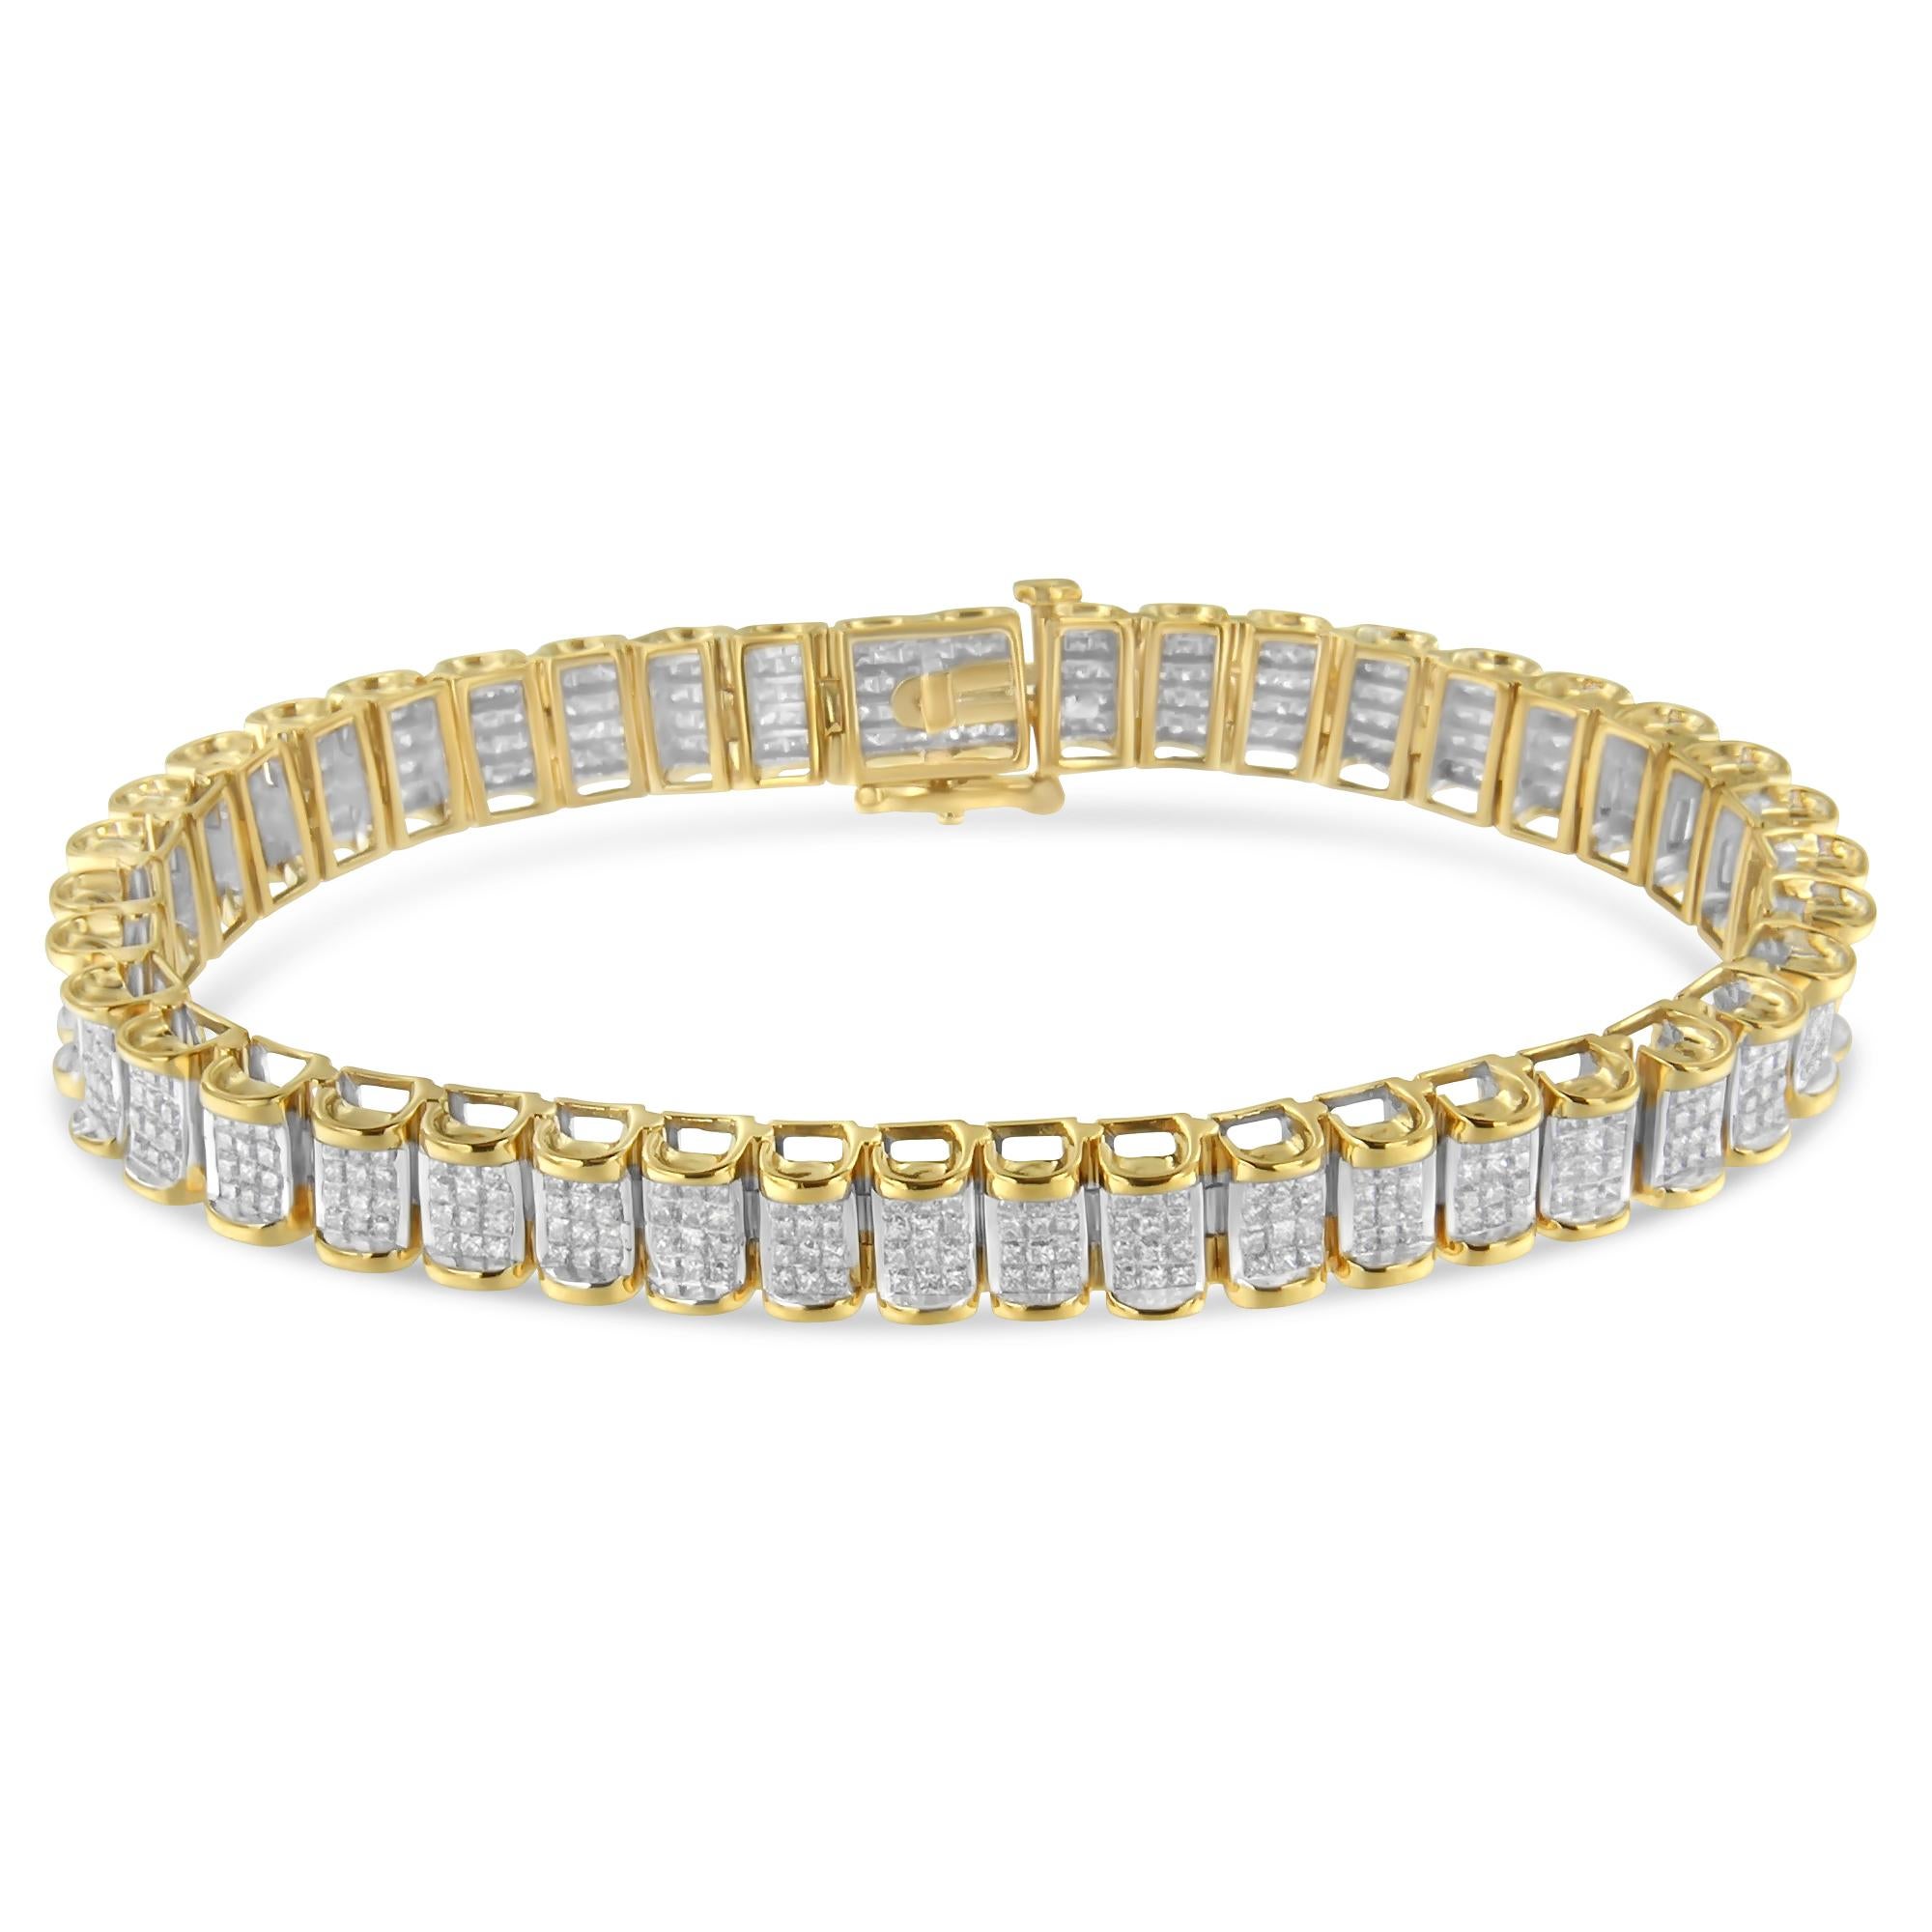 The true beauty of this bracelet is in the details. Interlocking links of yellow gold are connected by the brilliant Princess cut diamonds nestled inside each one. Made with the finest 14K yellow gold, this piece is a true expression of timeless